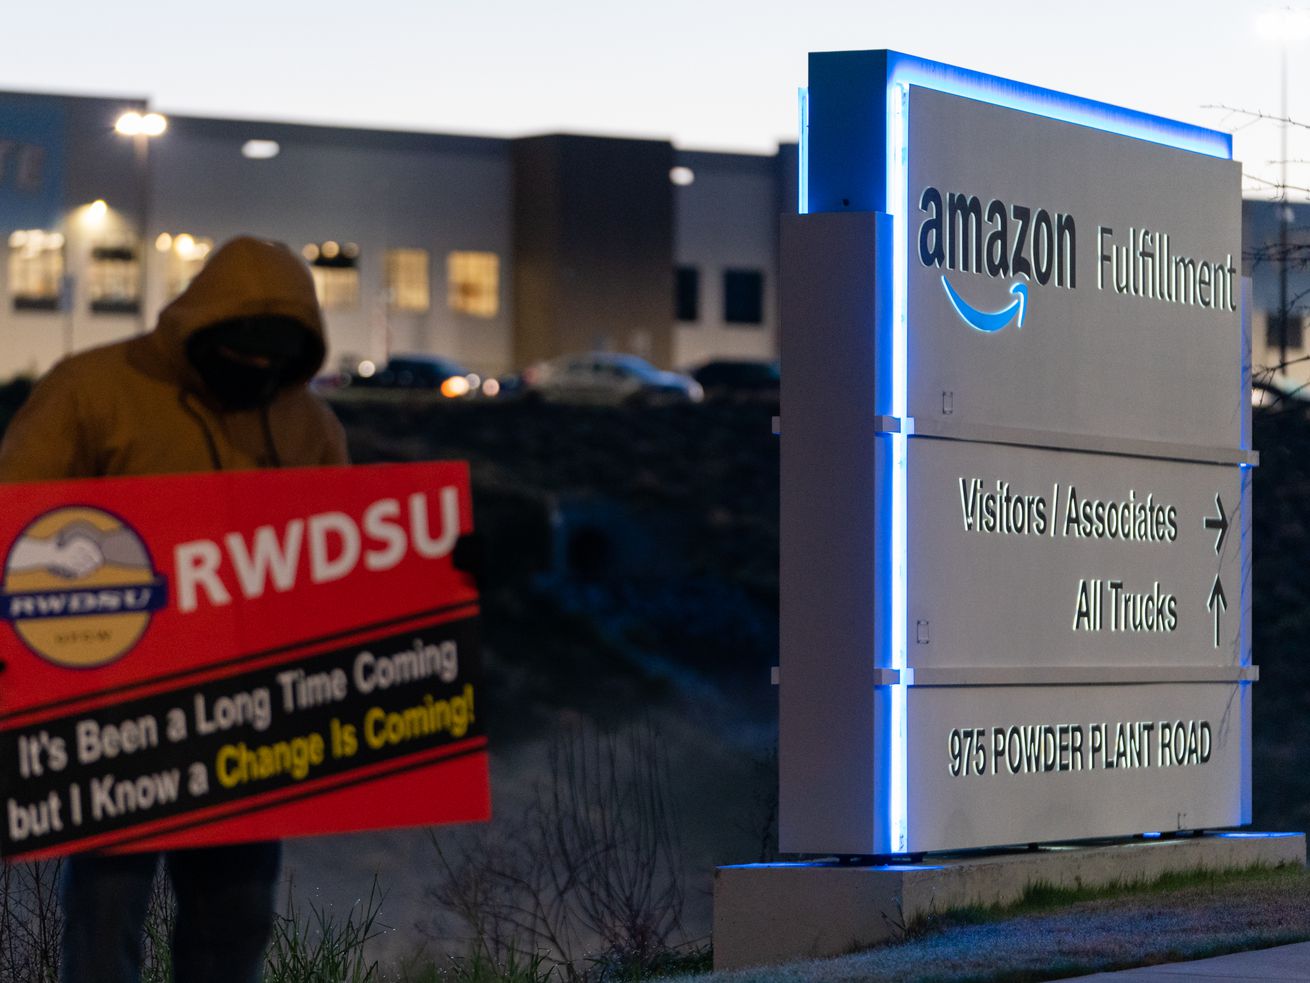 An RWDSU representative holds a sign that reads “RWDSU: It’s been a long time coming but I know a change is coming” outside the Amazon fulfillment warehouse at the center of a unionization drive on March 29, 2021, in Bessemer, Alabama.